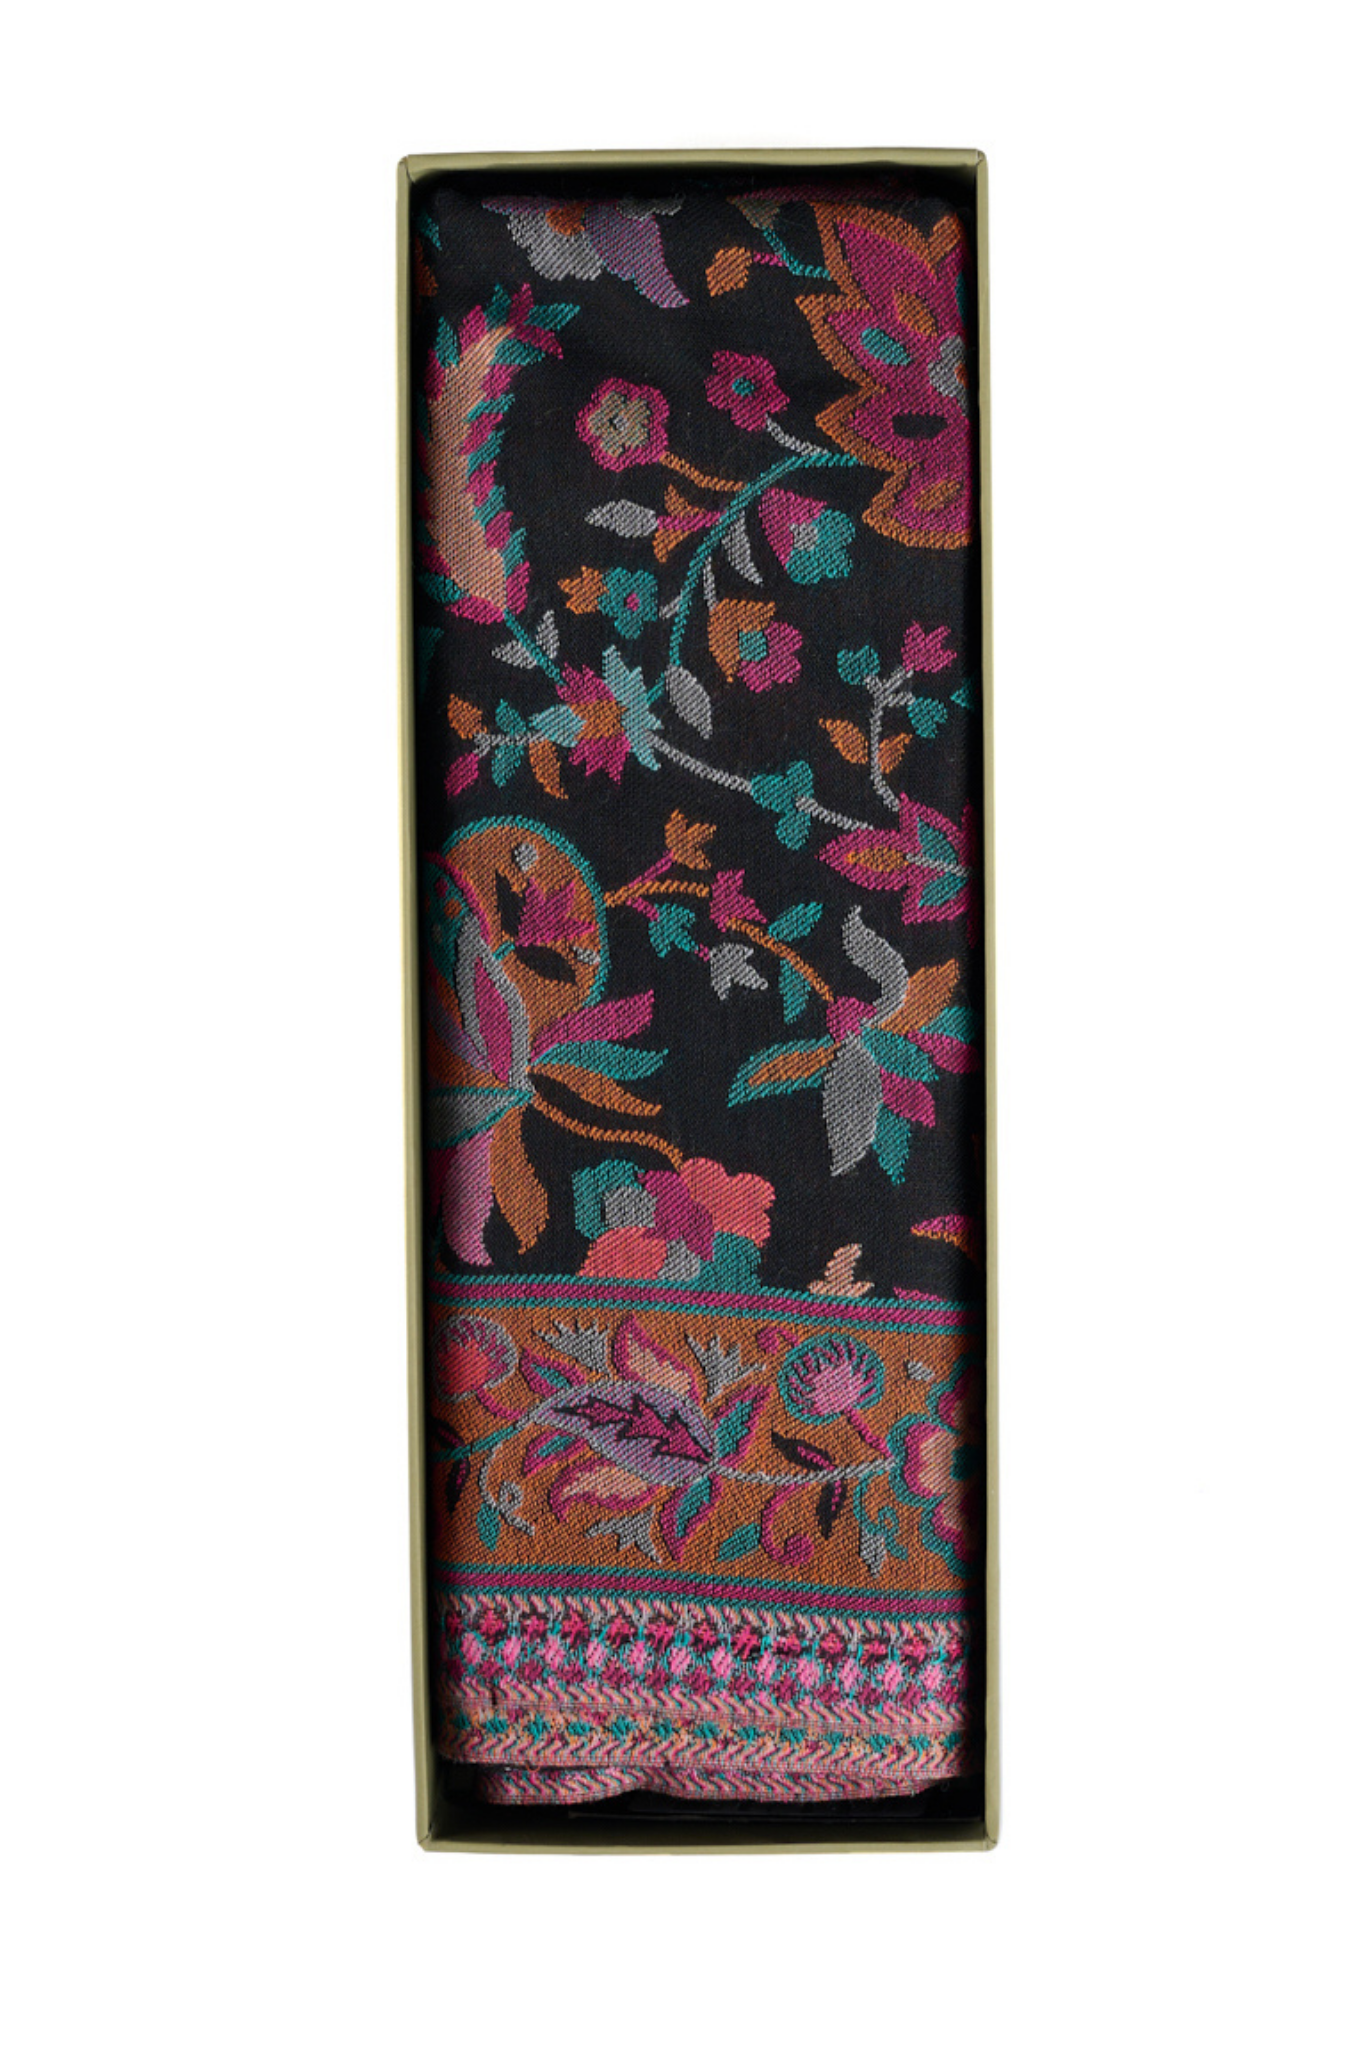 Gift Set of Silk Modal Kaani Stole for Him or Her ( Unisex Stole )